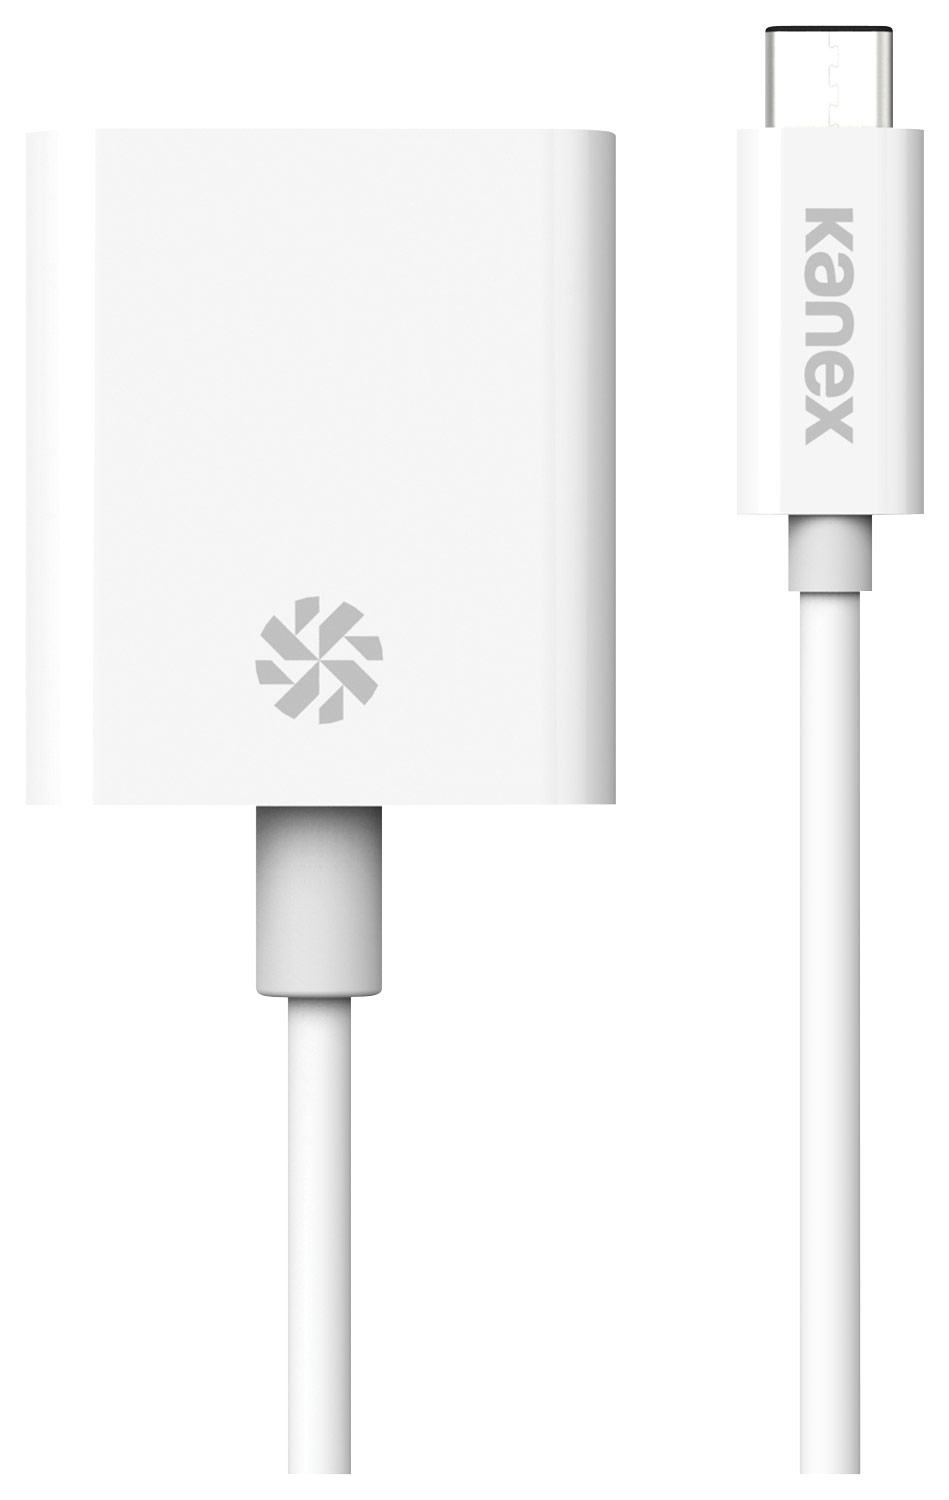 Kanex - USB Type C-to-HDMI 4K Ultra HD Adapter - White was $39.95 now $21.99 (45.0% off)